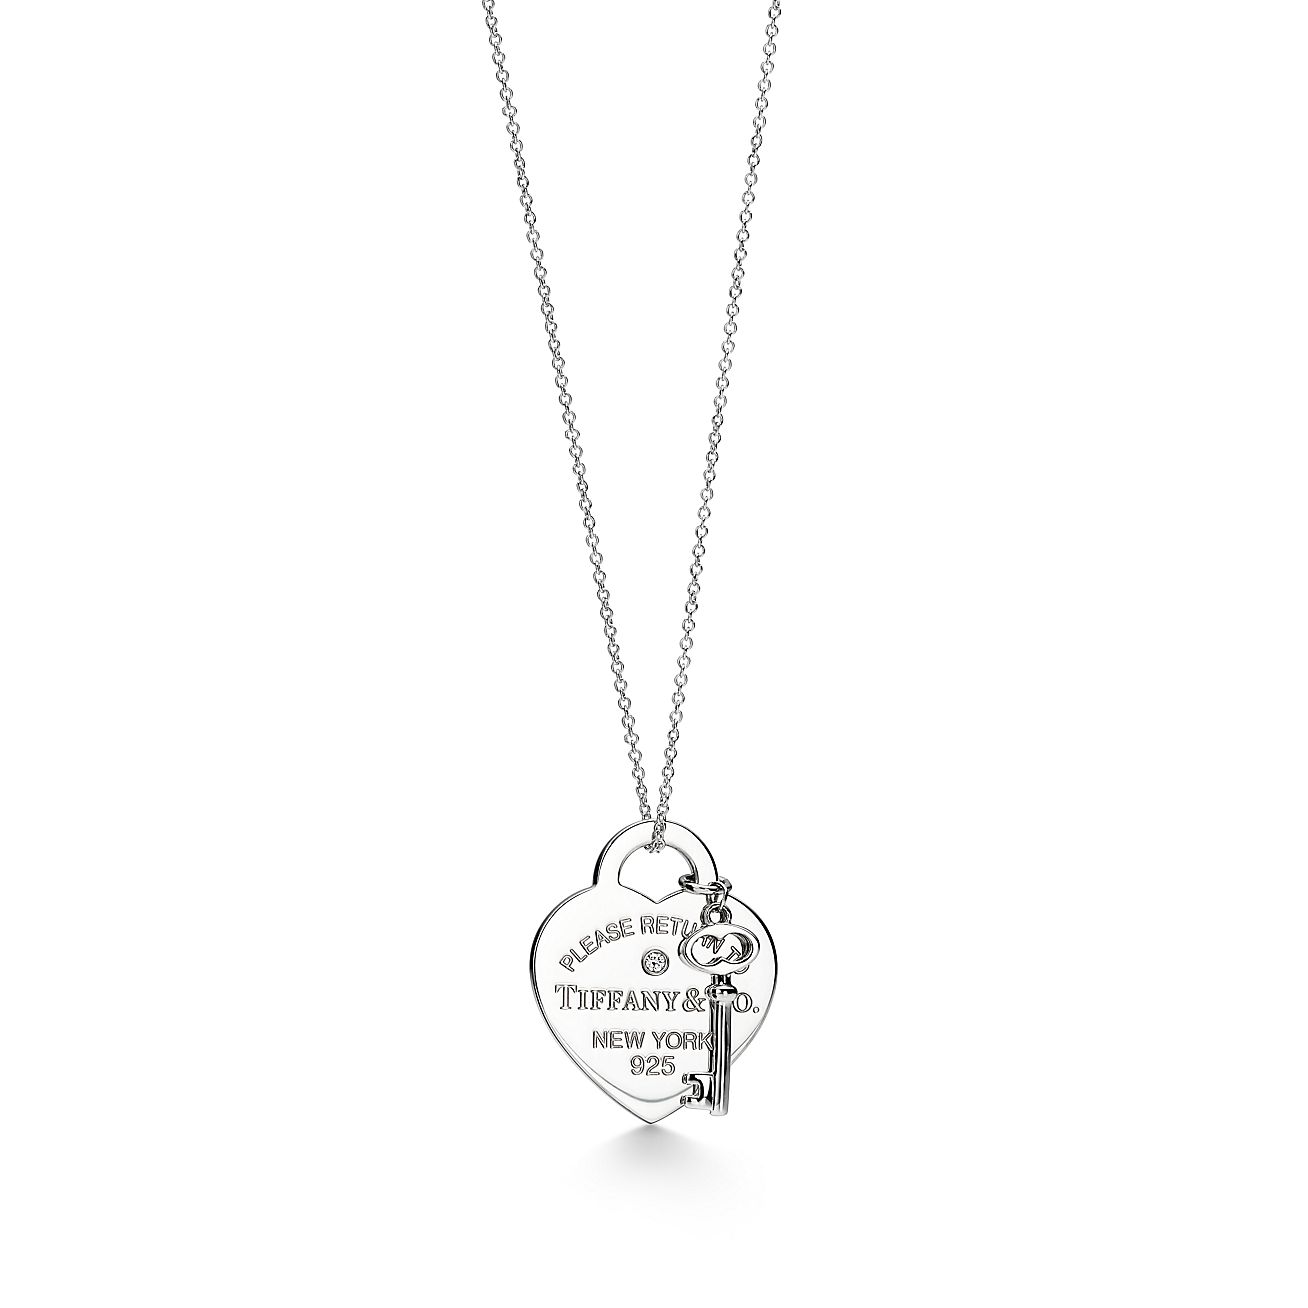 Return to Tiffany® Heart Tag and Key Necklace in Silver with a Diamond, Medium | Tiffany & Co.